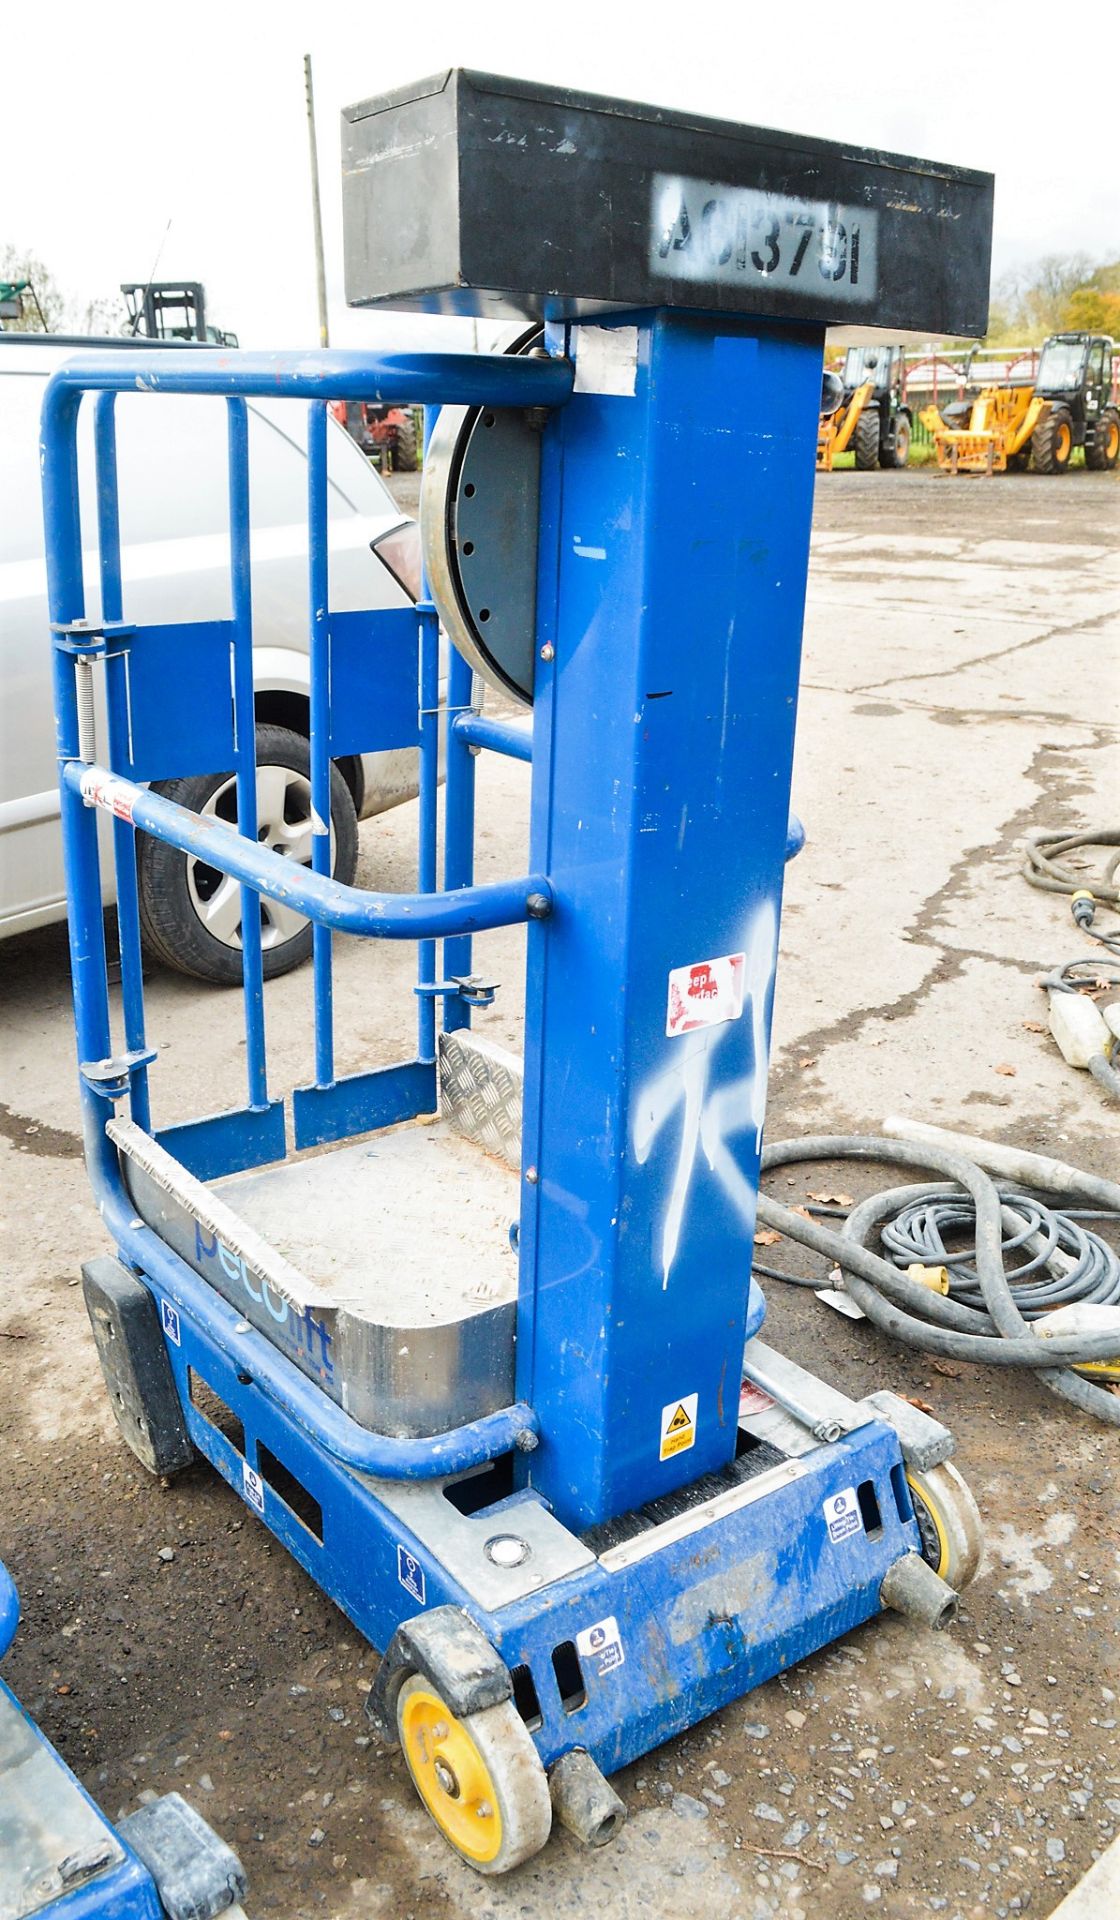 Power Tower Peco Lift manual vertical personnel lift A613791 - Image 2 of 2